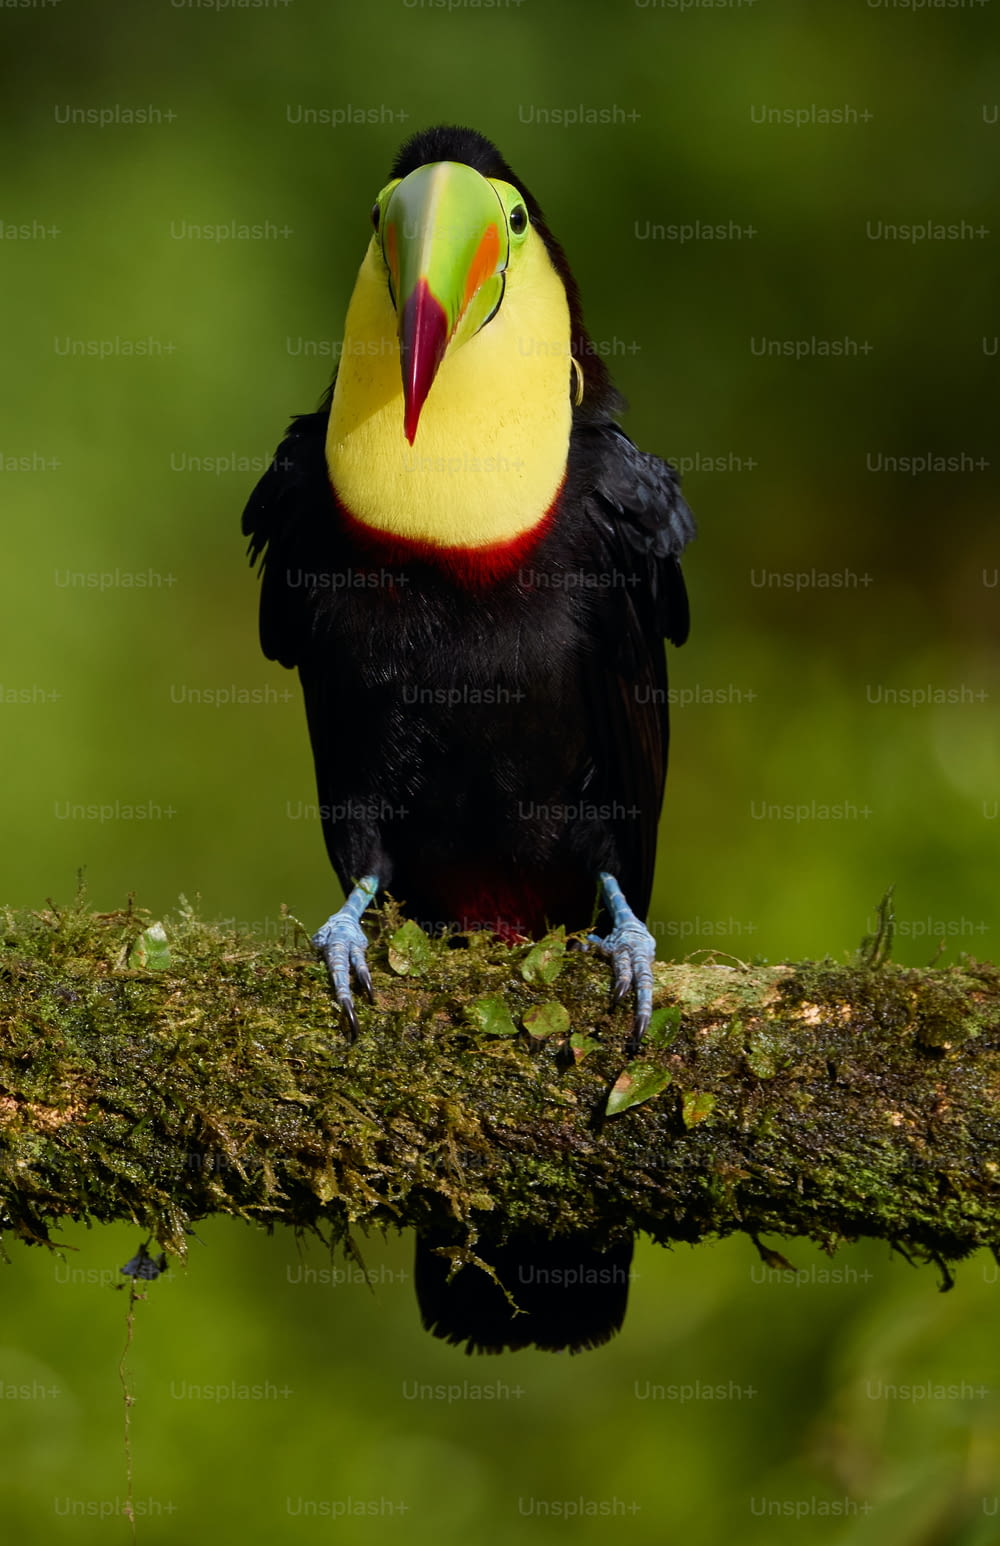 a colorful bird perched on a tree branch